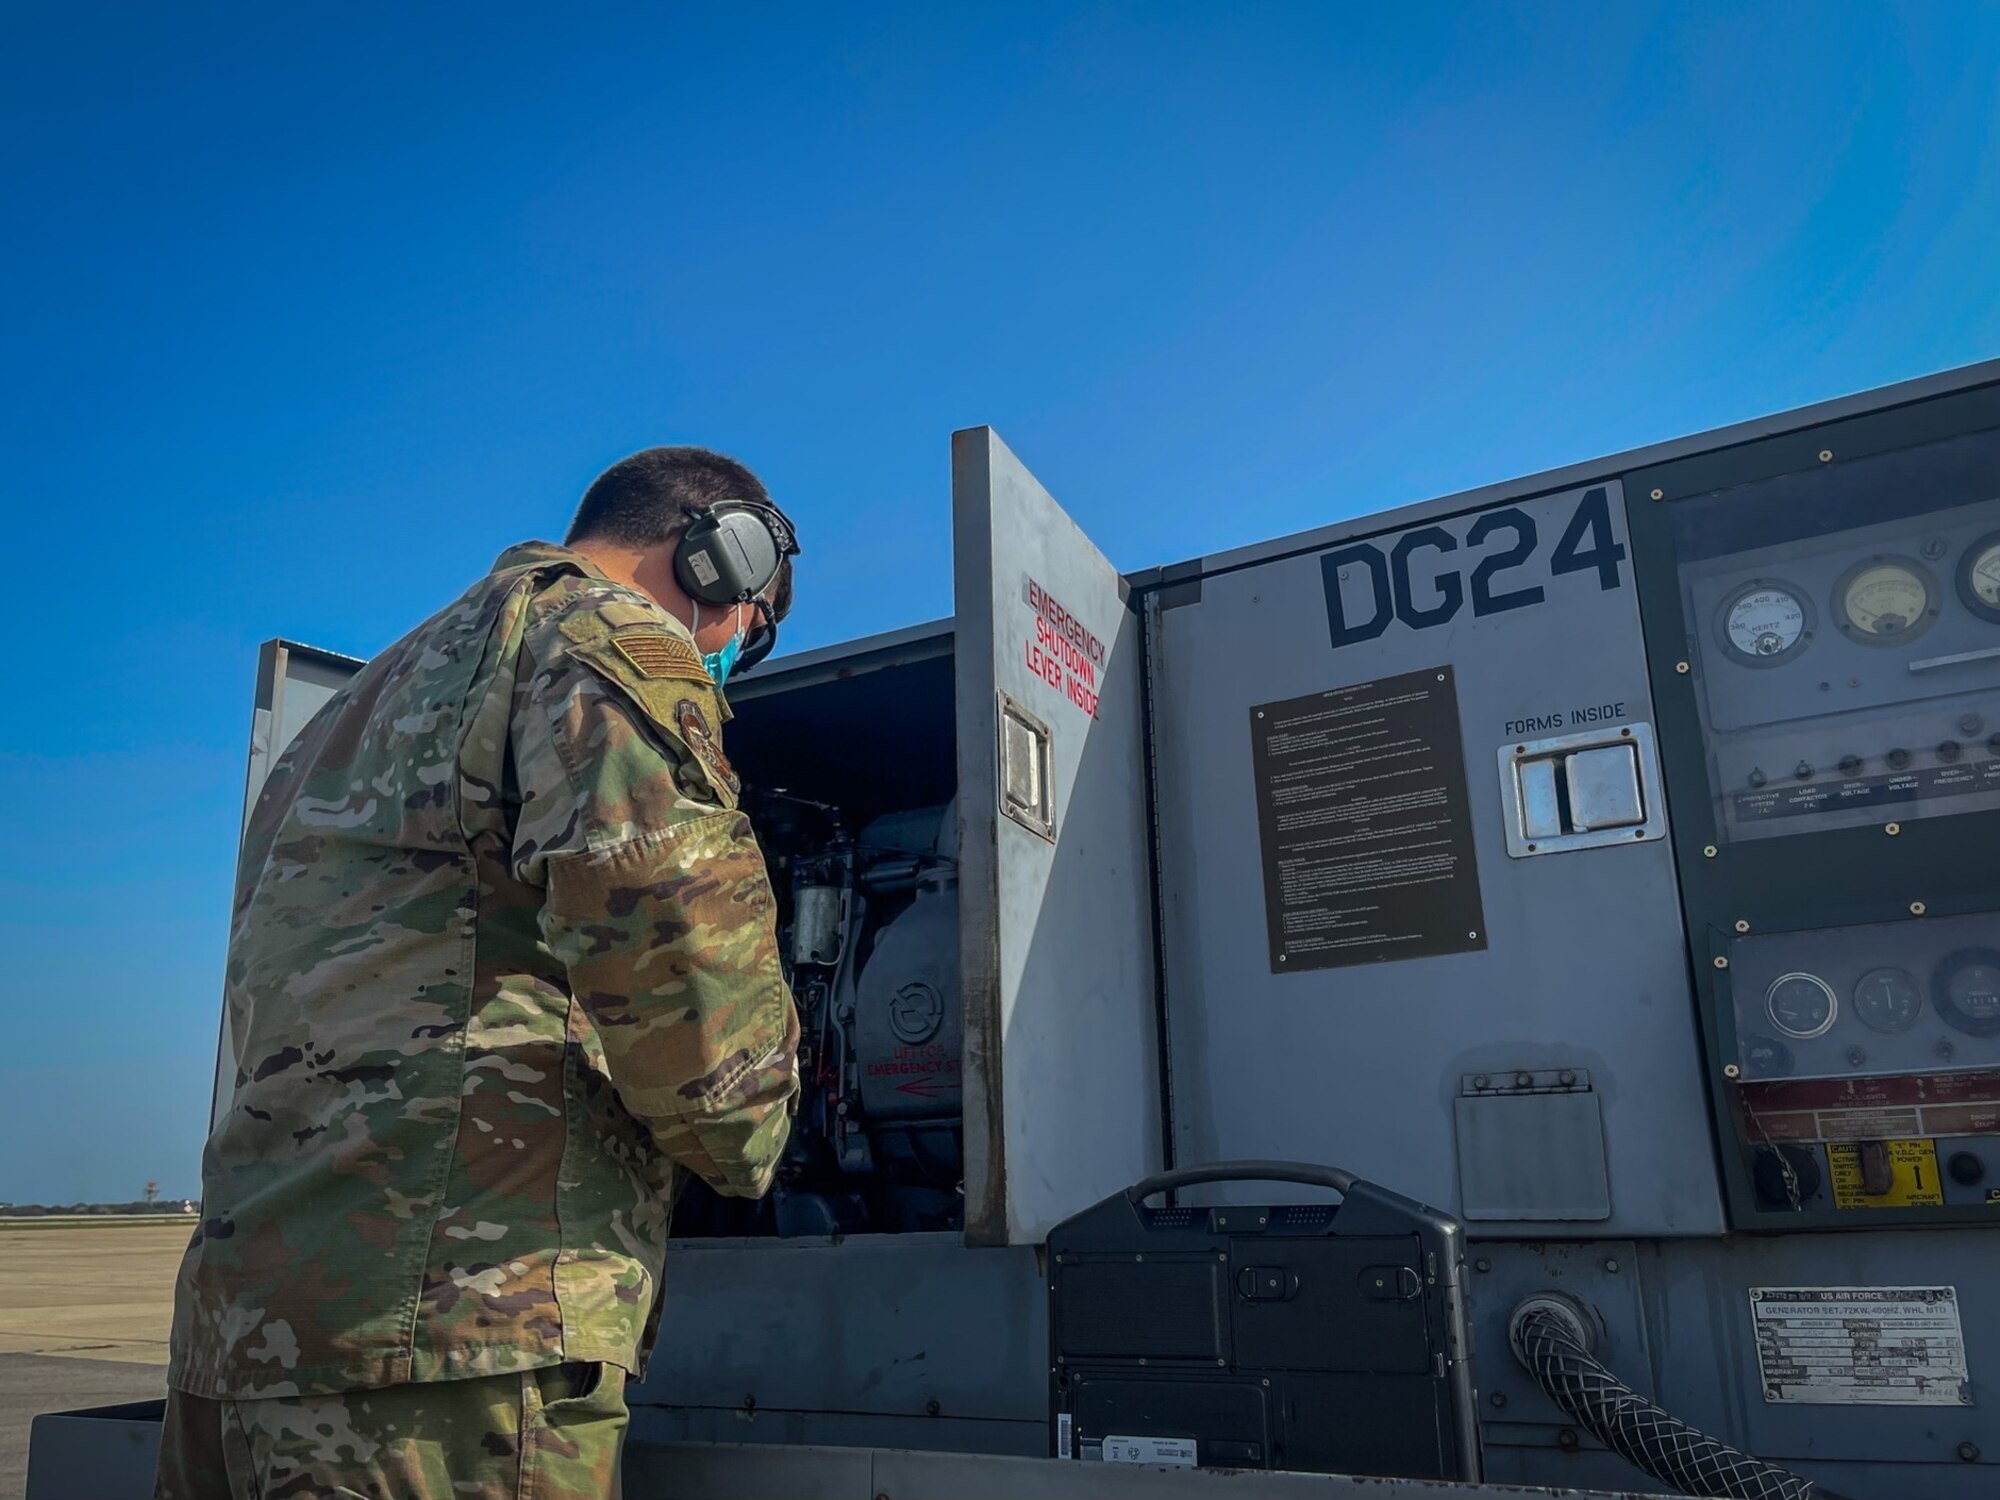 Senior Airman Howard Johnson, 725th Air Mobility Squadron (AMS) crew chief, drives a truck hauling aerospace ground equipment during a multi-capable airman (MCA) exercise at Naval Station Rota, Spain, Feb. 11, 2022. During the weeklong MCA exercise, 725th AMS participated in a familiarization of new tasks using real equipment as well as virtual reality training tools. An MCA is critical to enabling agile combat employment, which is a proactive and reactive operational scheme of maneuver designed to address the challenges of projecting combat power across the globe with a significantly reduced global footprint, increased risk from adversarial technological advances, and fiscal and political constraints. (Courtesy photo)